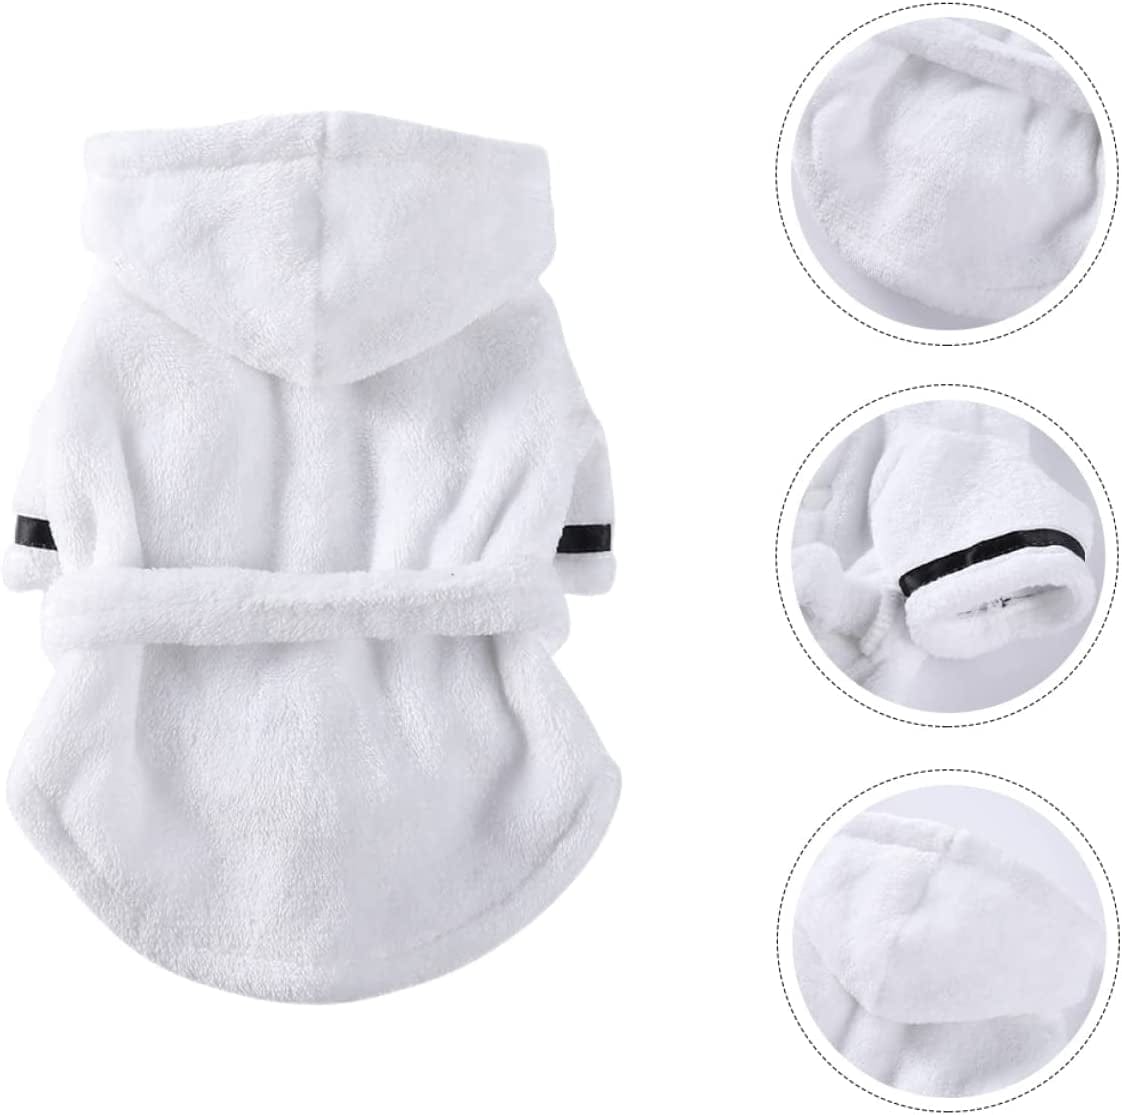 Balacoo 2Pcs Hood with Comfortable Supple Dog Pajama Quick Polyester Soft Belt Bathrobe Towel Robe Gown Fast for L Dogs Drying Robes Super Waist Cat Small Pet Bath Cats after Pajamas